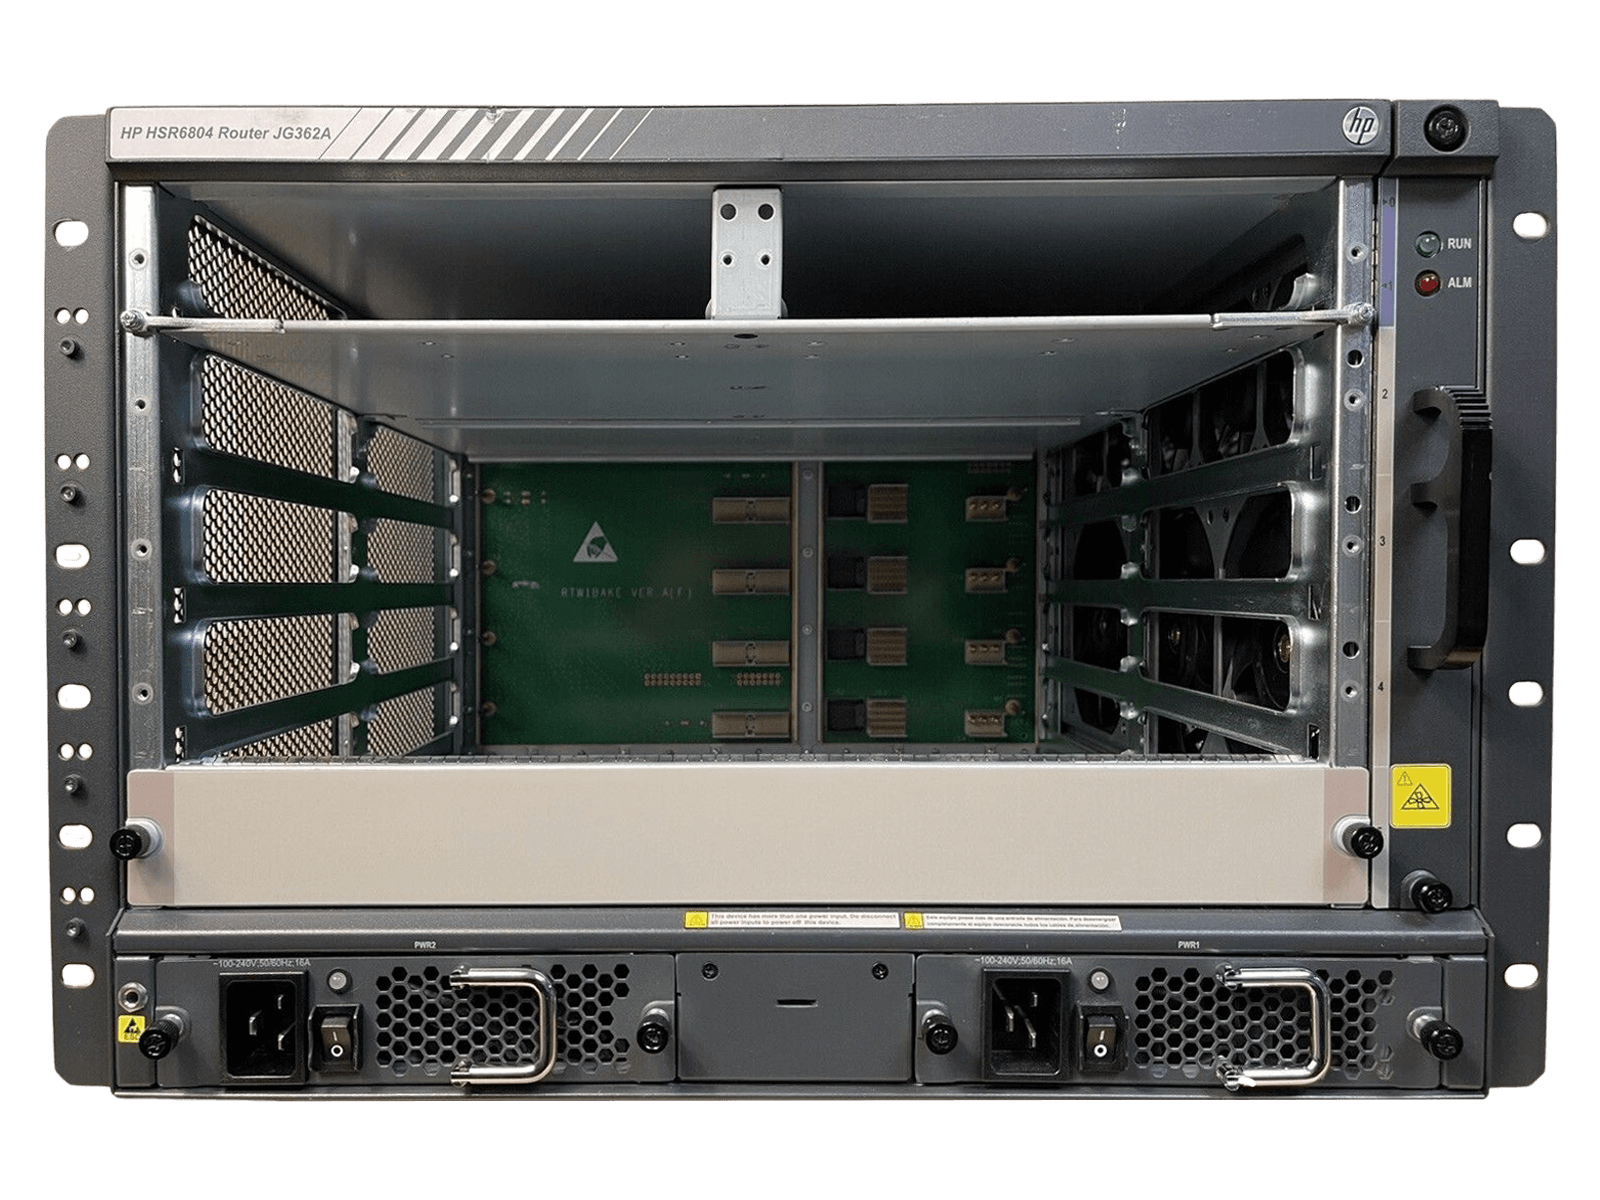 HP JG362A FlexNetwork HSR6804 RSE-X2 Router Chassis with Fan Module.